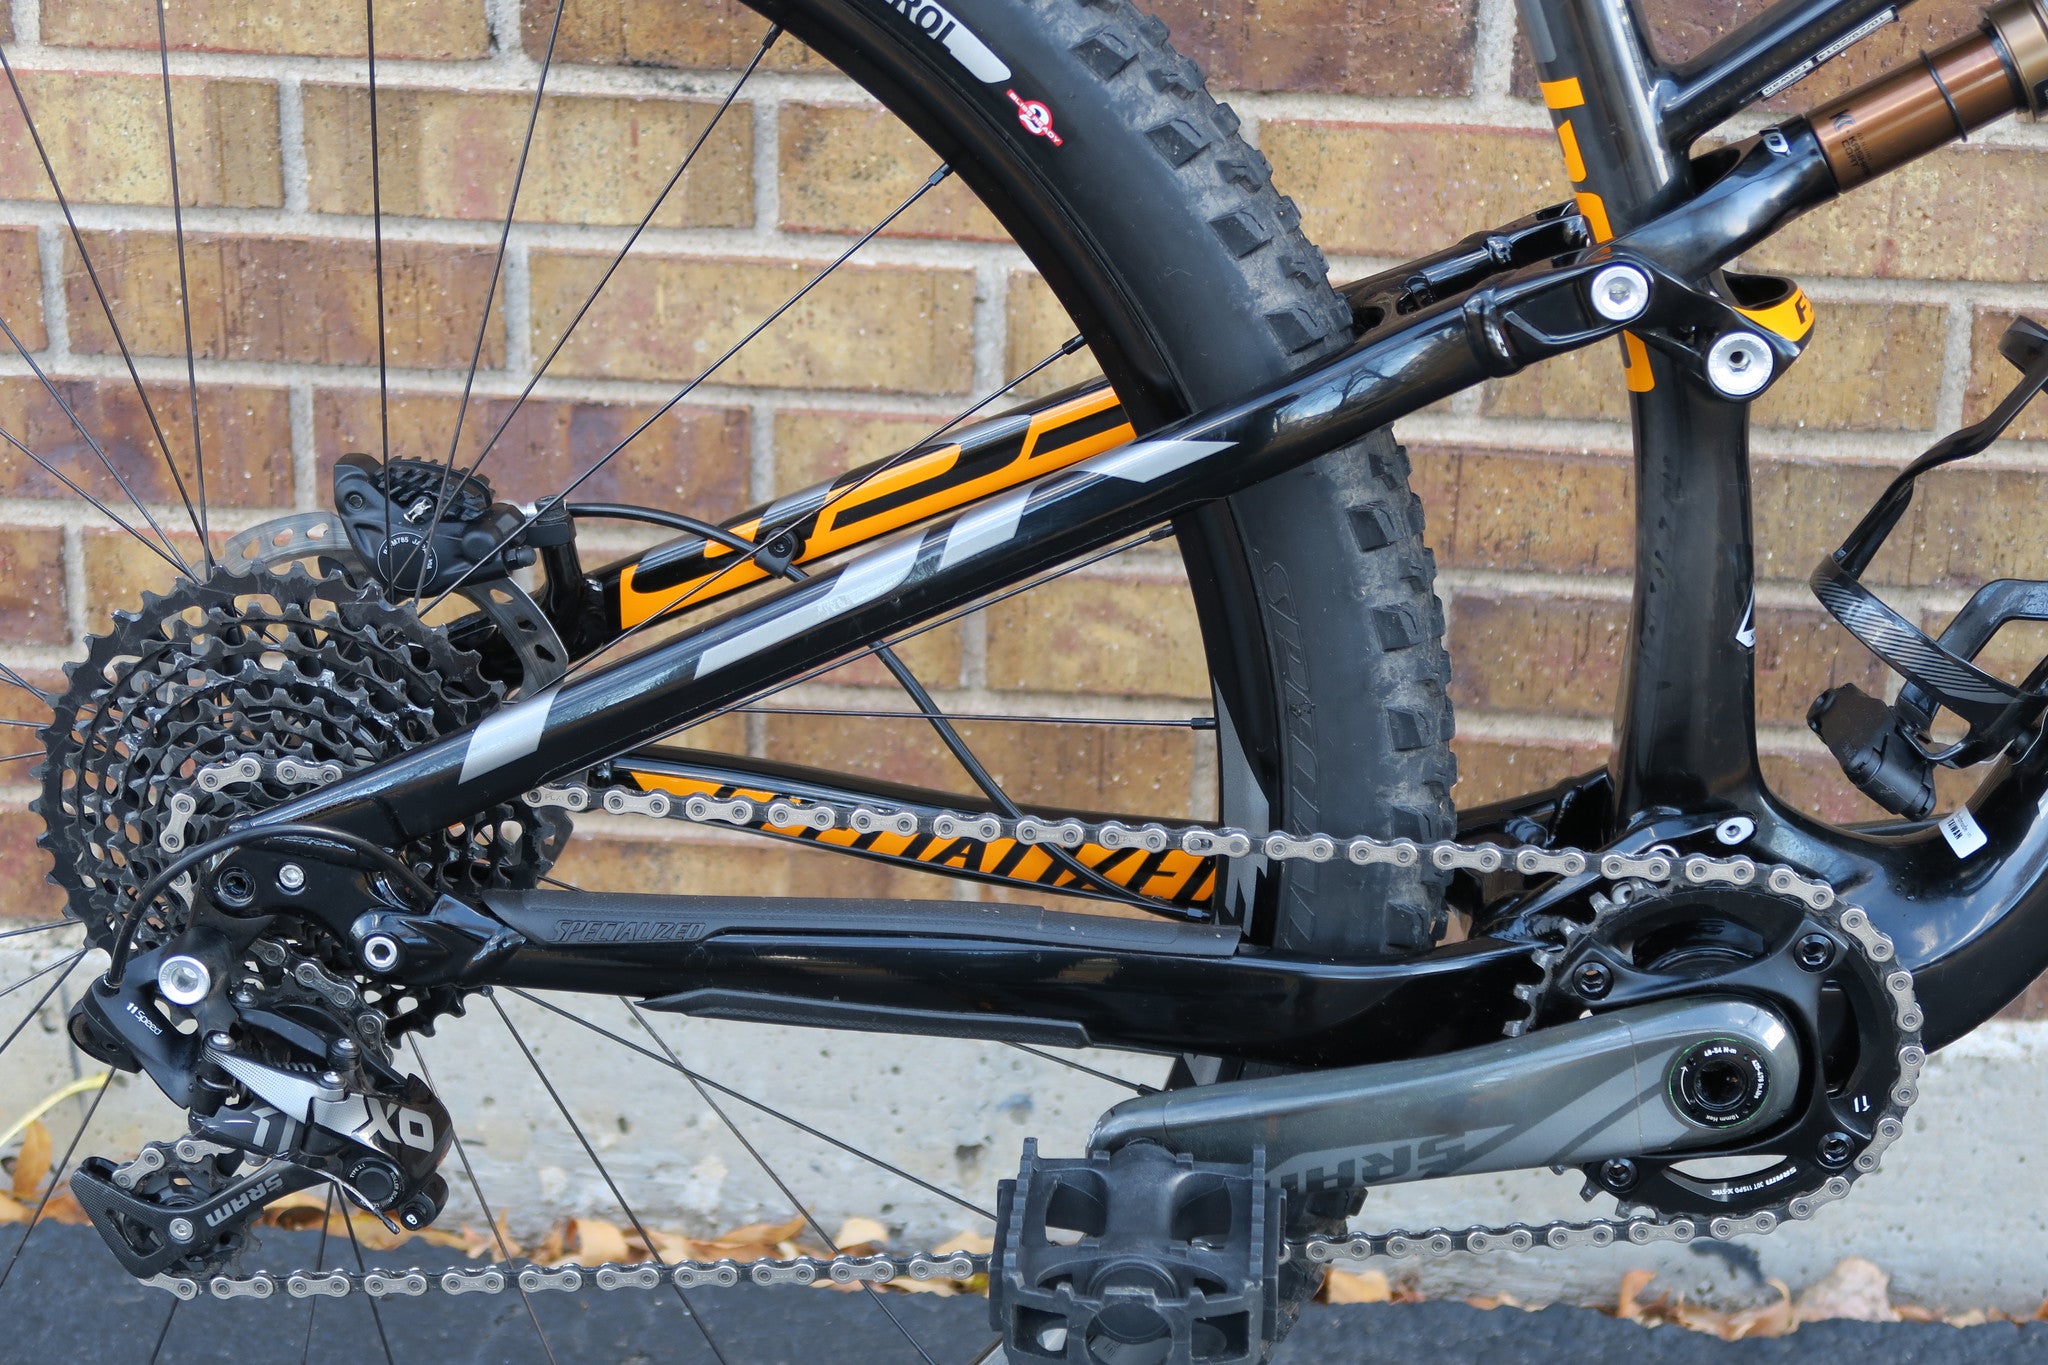 2015 SPECIALIZED CAMBER EXPERT CARBON EVO 29